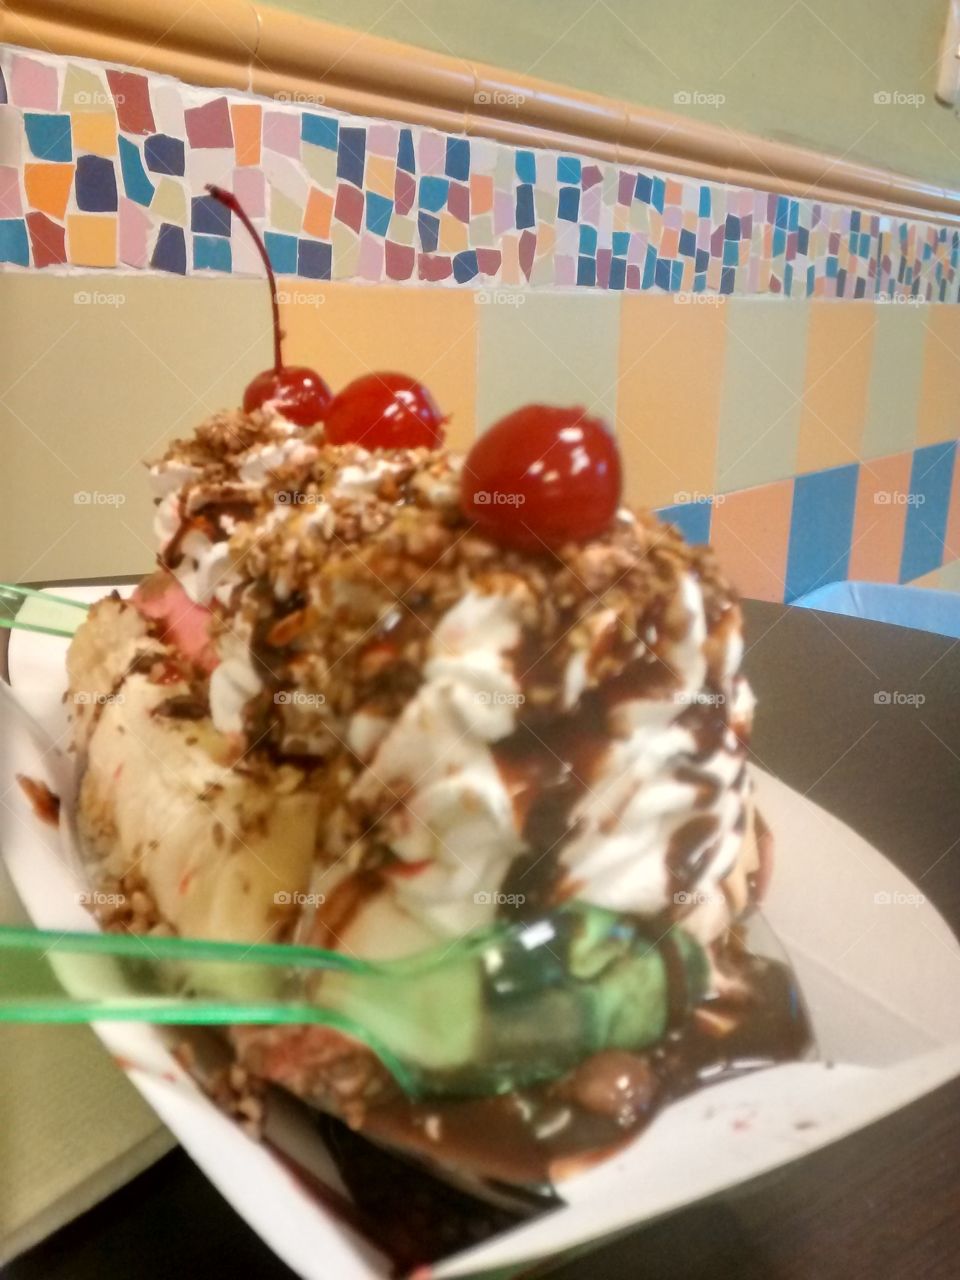 Banana Split. A photo of a banana split that I bought with muy girlfriend